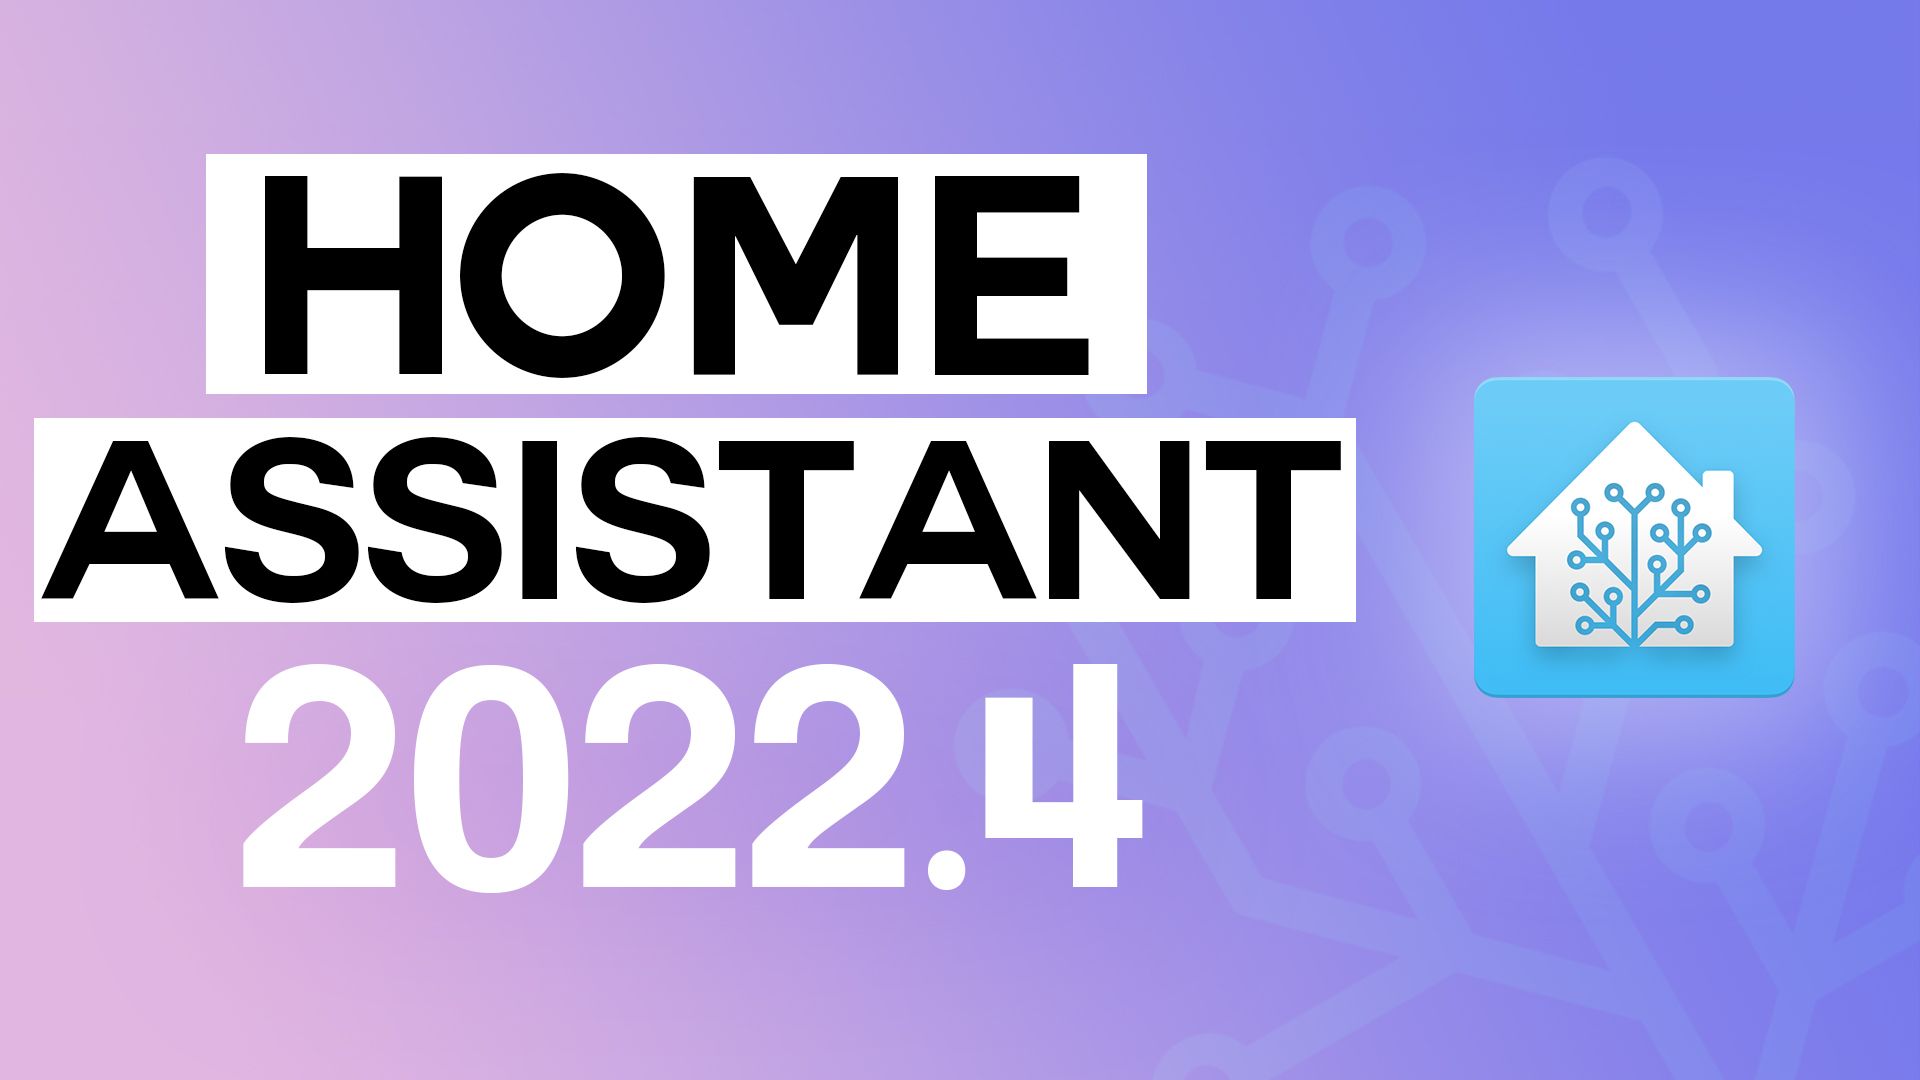 Everything New In Home Assistant 2022.4